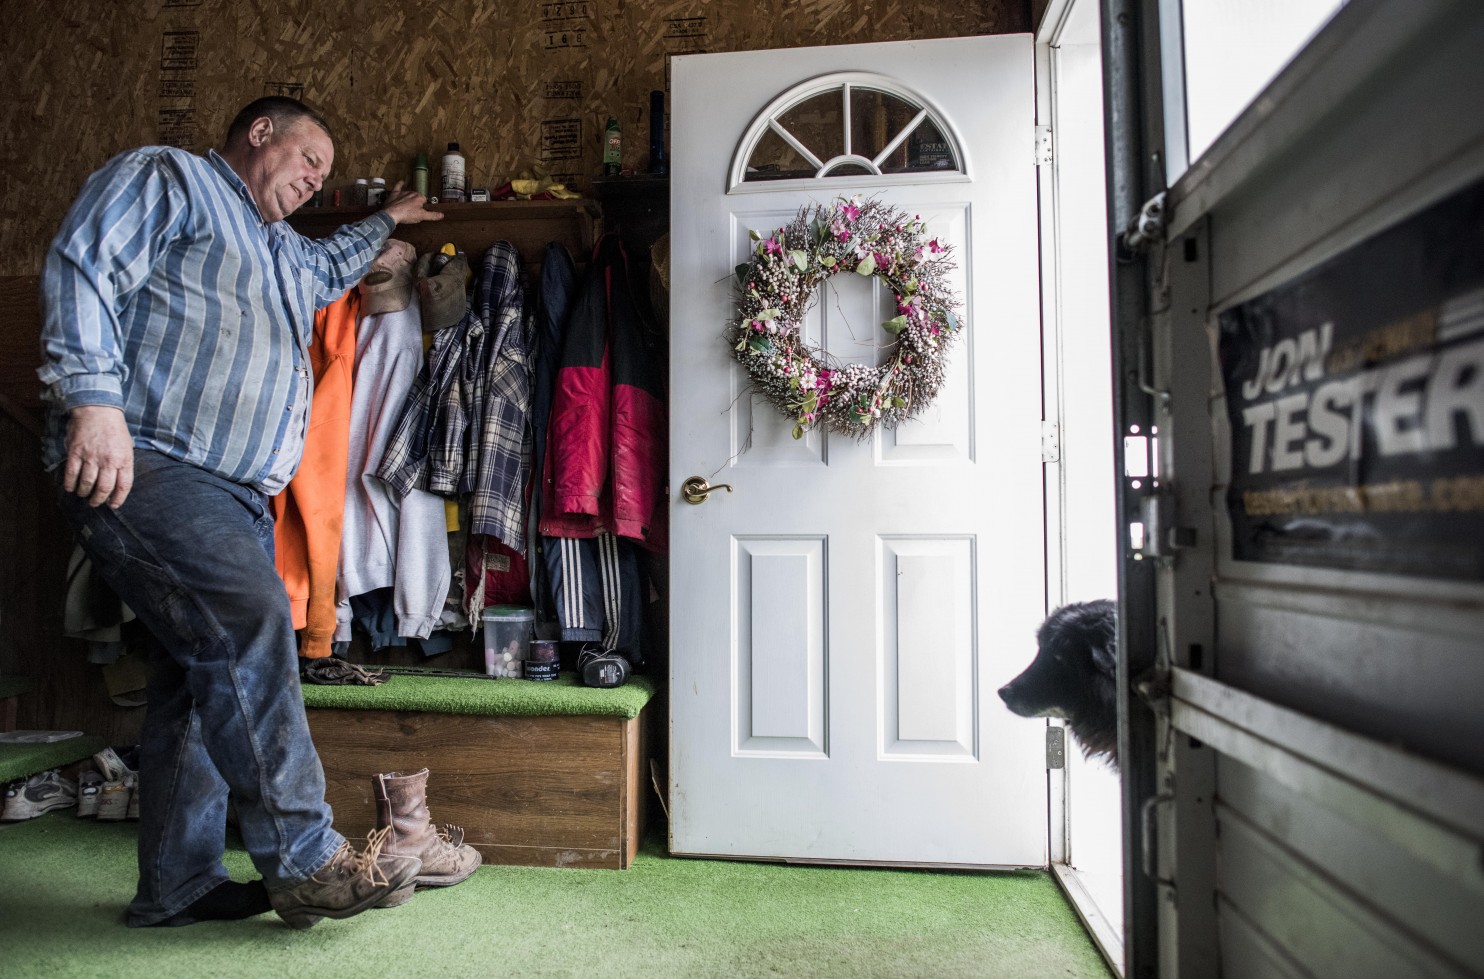 After long day of farm work, Sen. Jon Tester removes his dirty boots in the garage on his Montana farm. As a red-state Democrat, he offer useful insights for his party — but faces a tough 2018 race. (Melina Mara/The Washington Post)